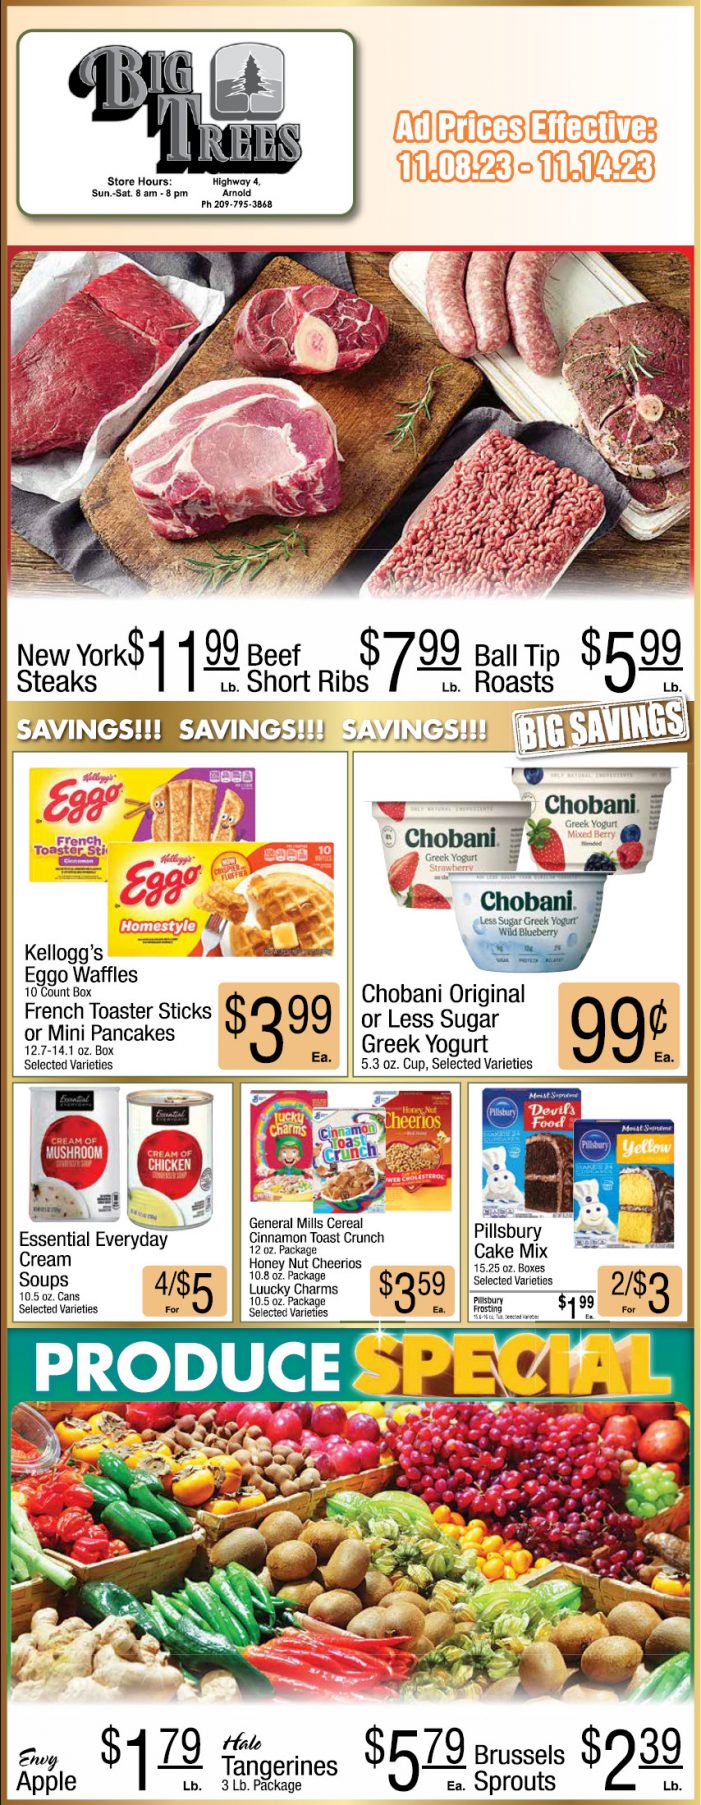 Big Trees Market Weekly Ad, Grocery, Produce, Meat & Deli Specials Through November 14th!  Shop Local & Save!